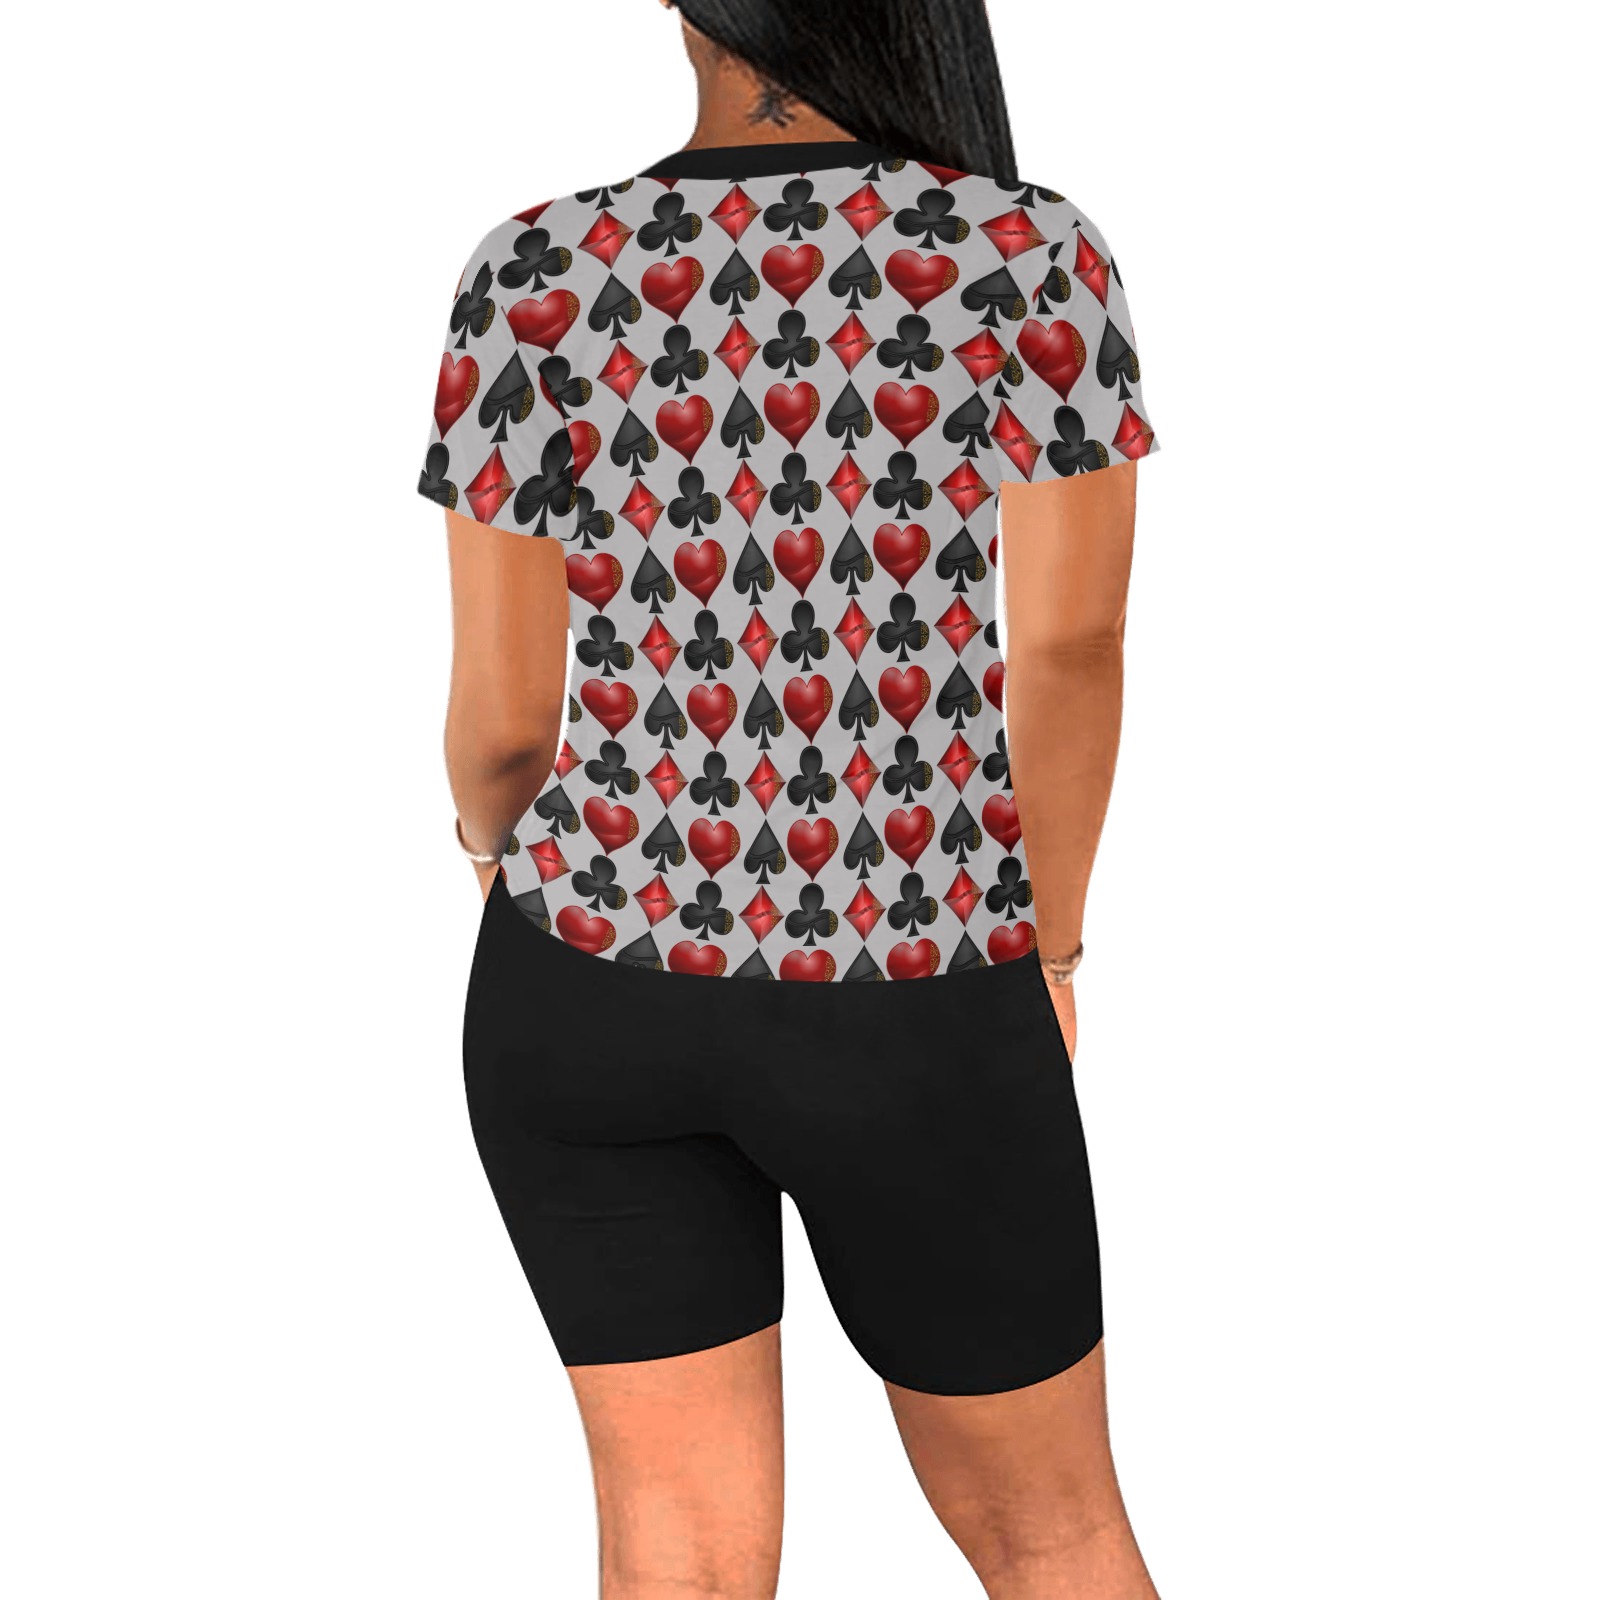 Black and Red Casino Card Shapes on Silver Women's Short Yoga Set